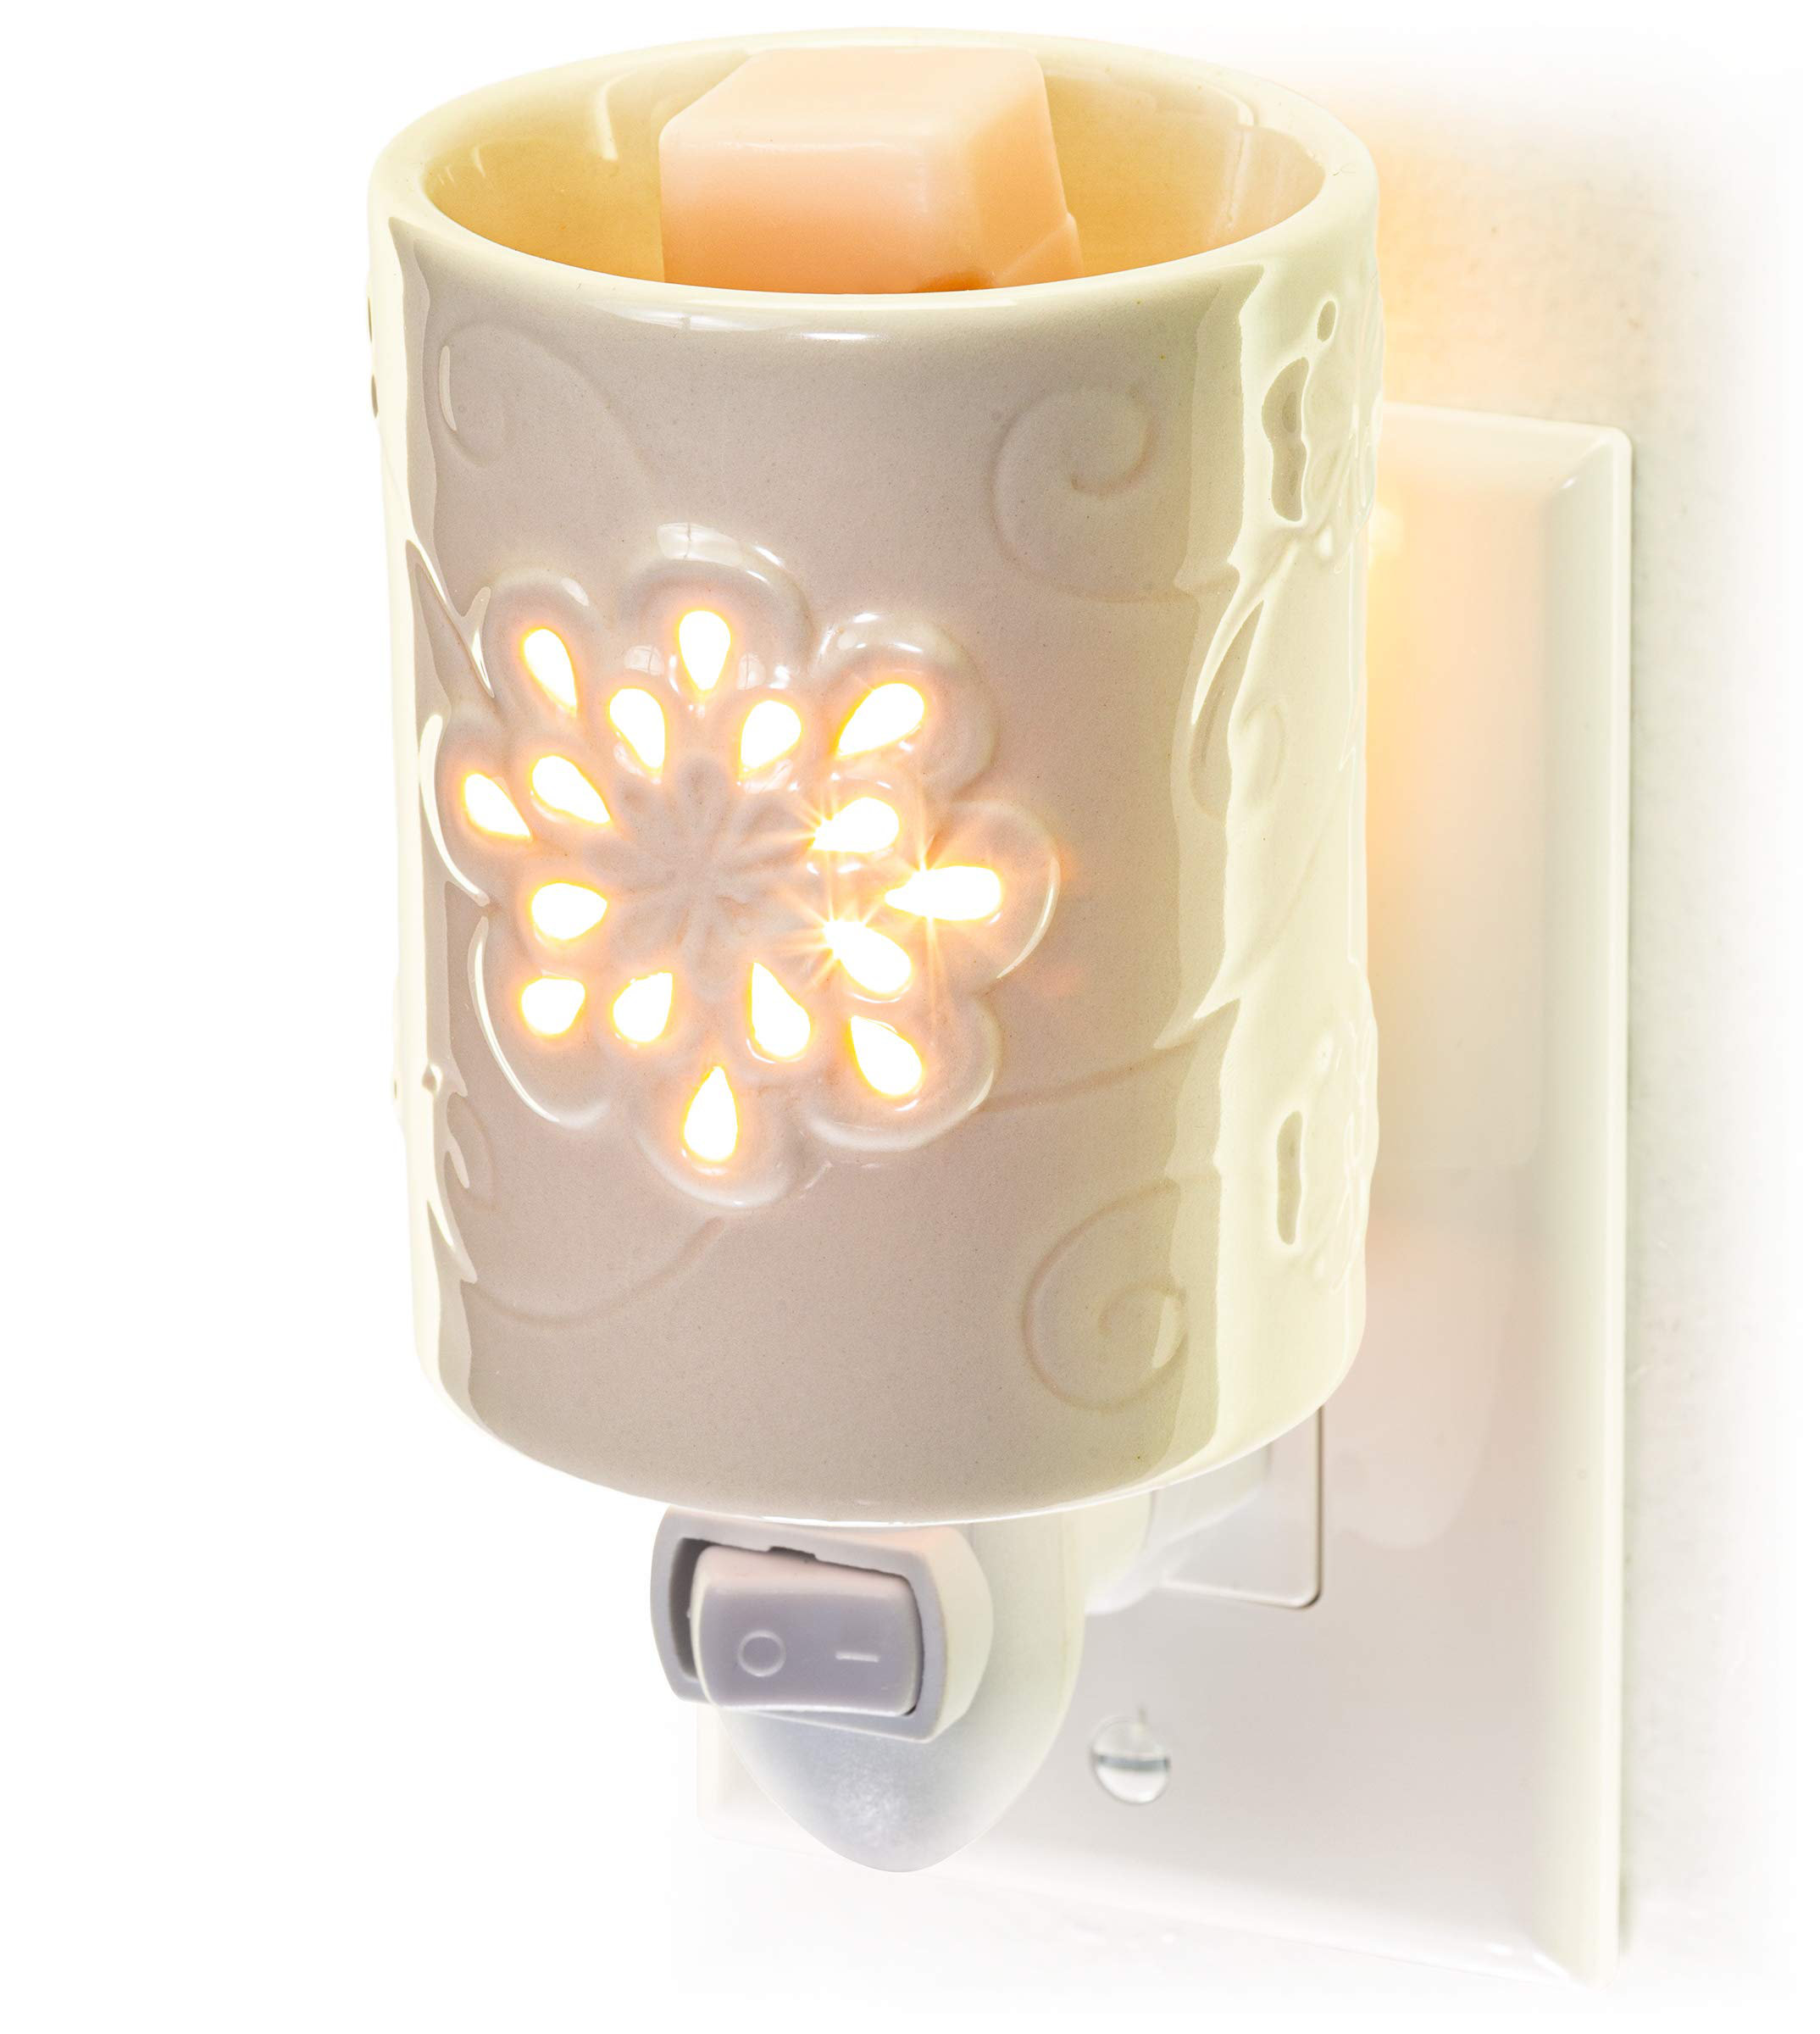 Mosiee Outlet Plug-in Wax Warmer, scentsy Wax Melts Candle Warmer for Home  Office Decor 